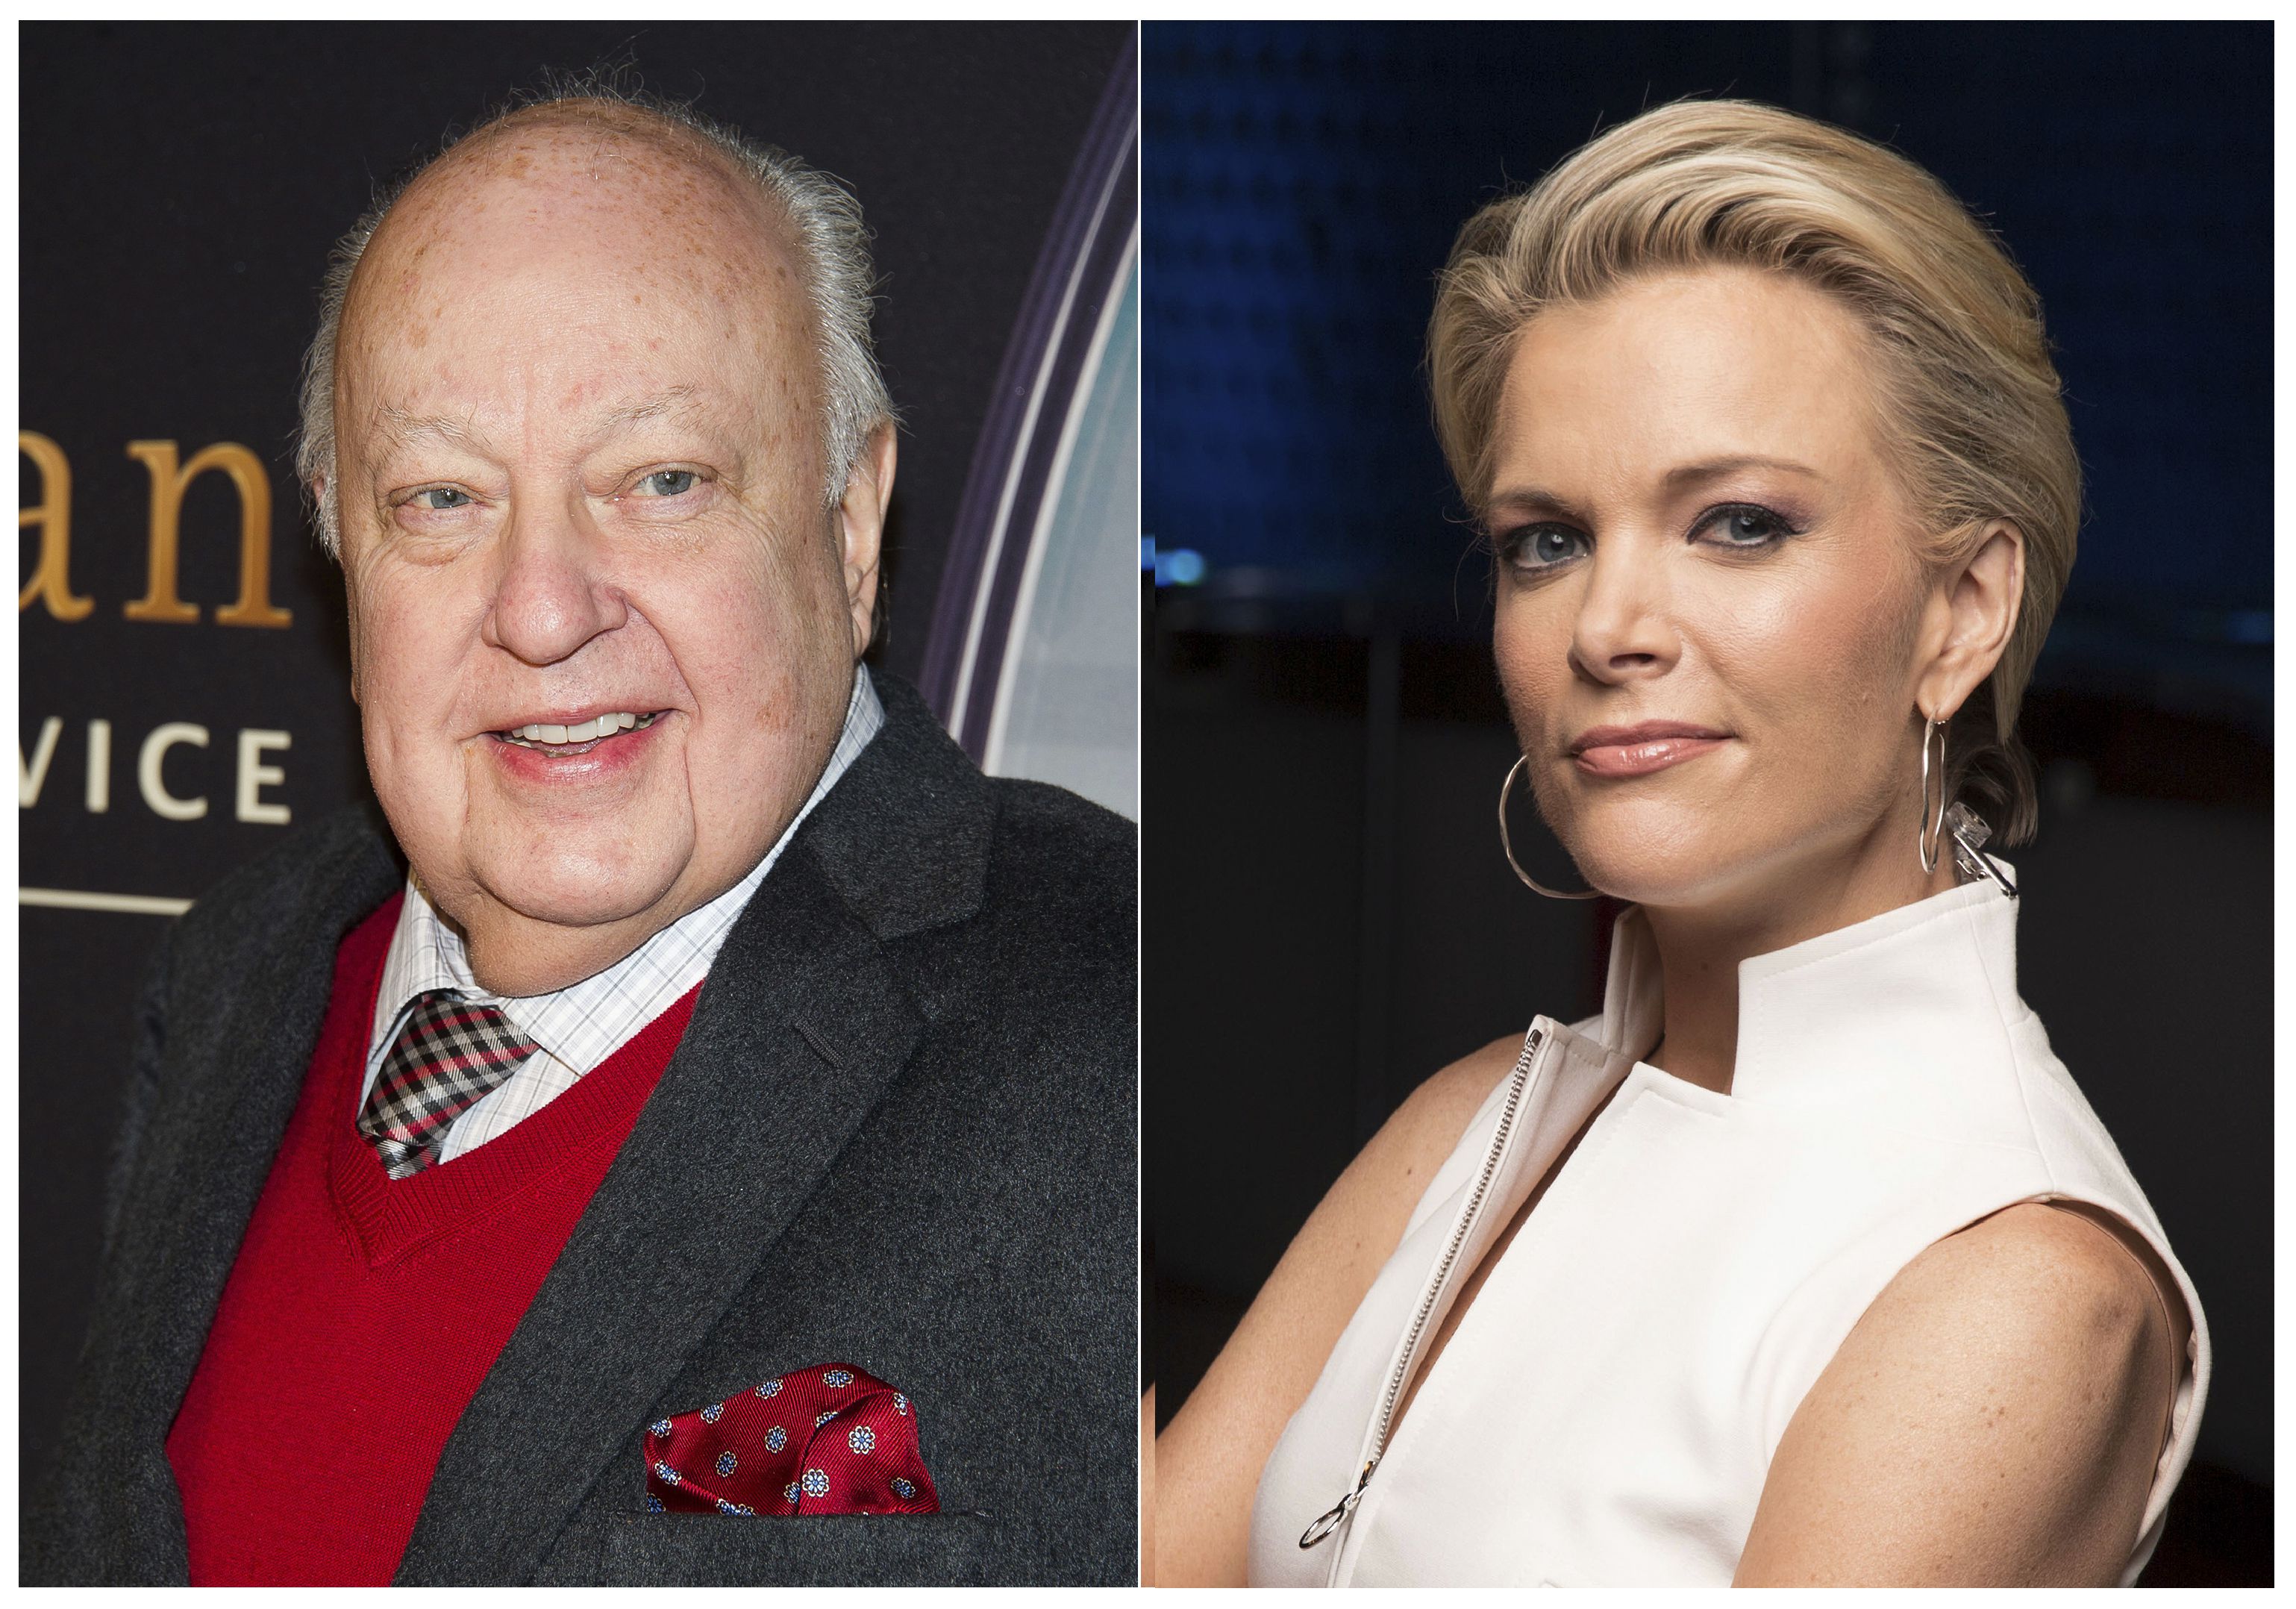 Megyn Kelly Porn Captions - Megyn Kelly says she did 'twirl' before Roger Ailes, too